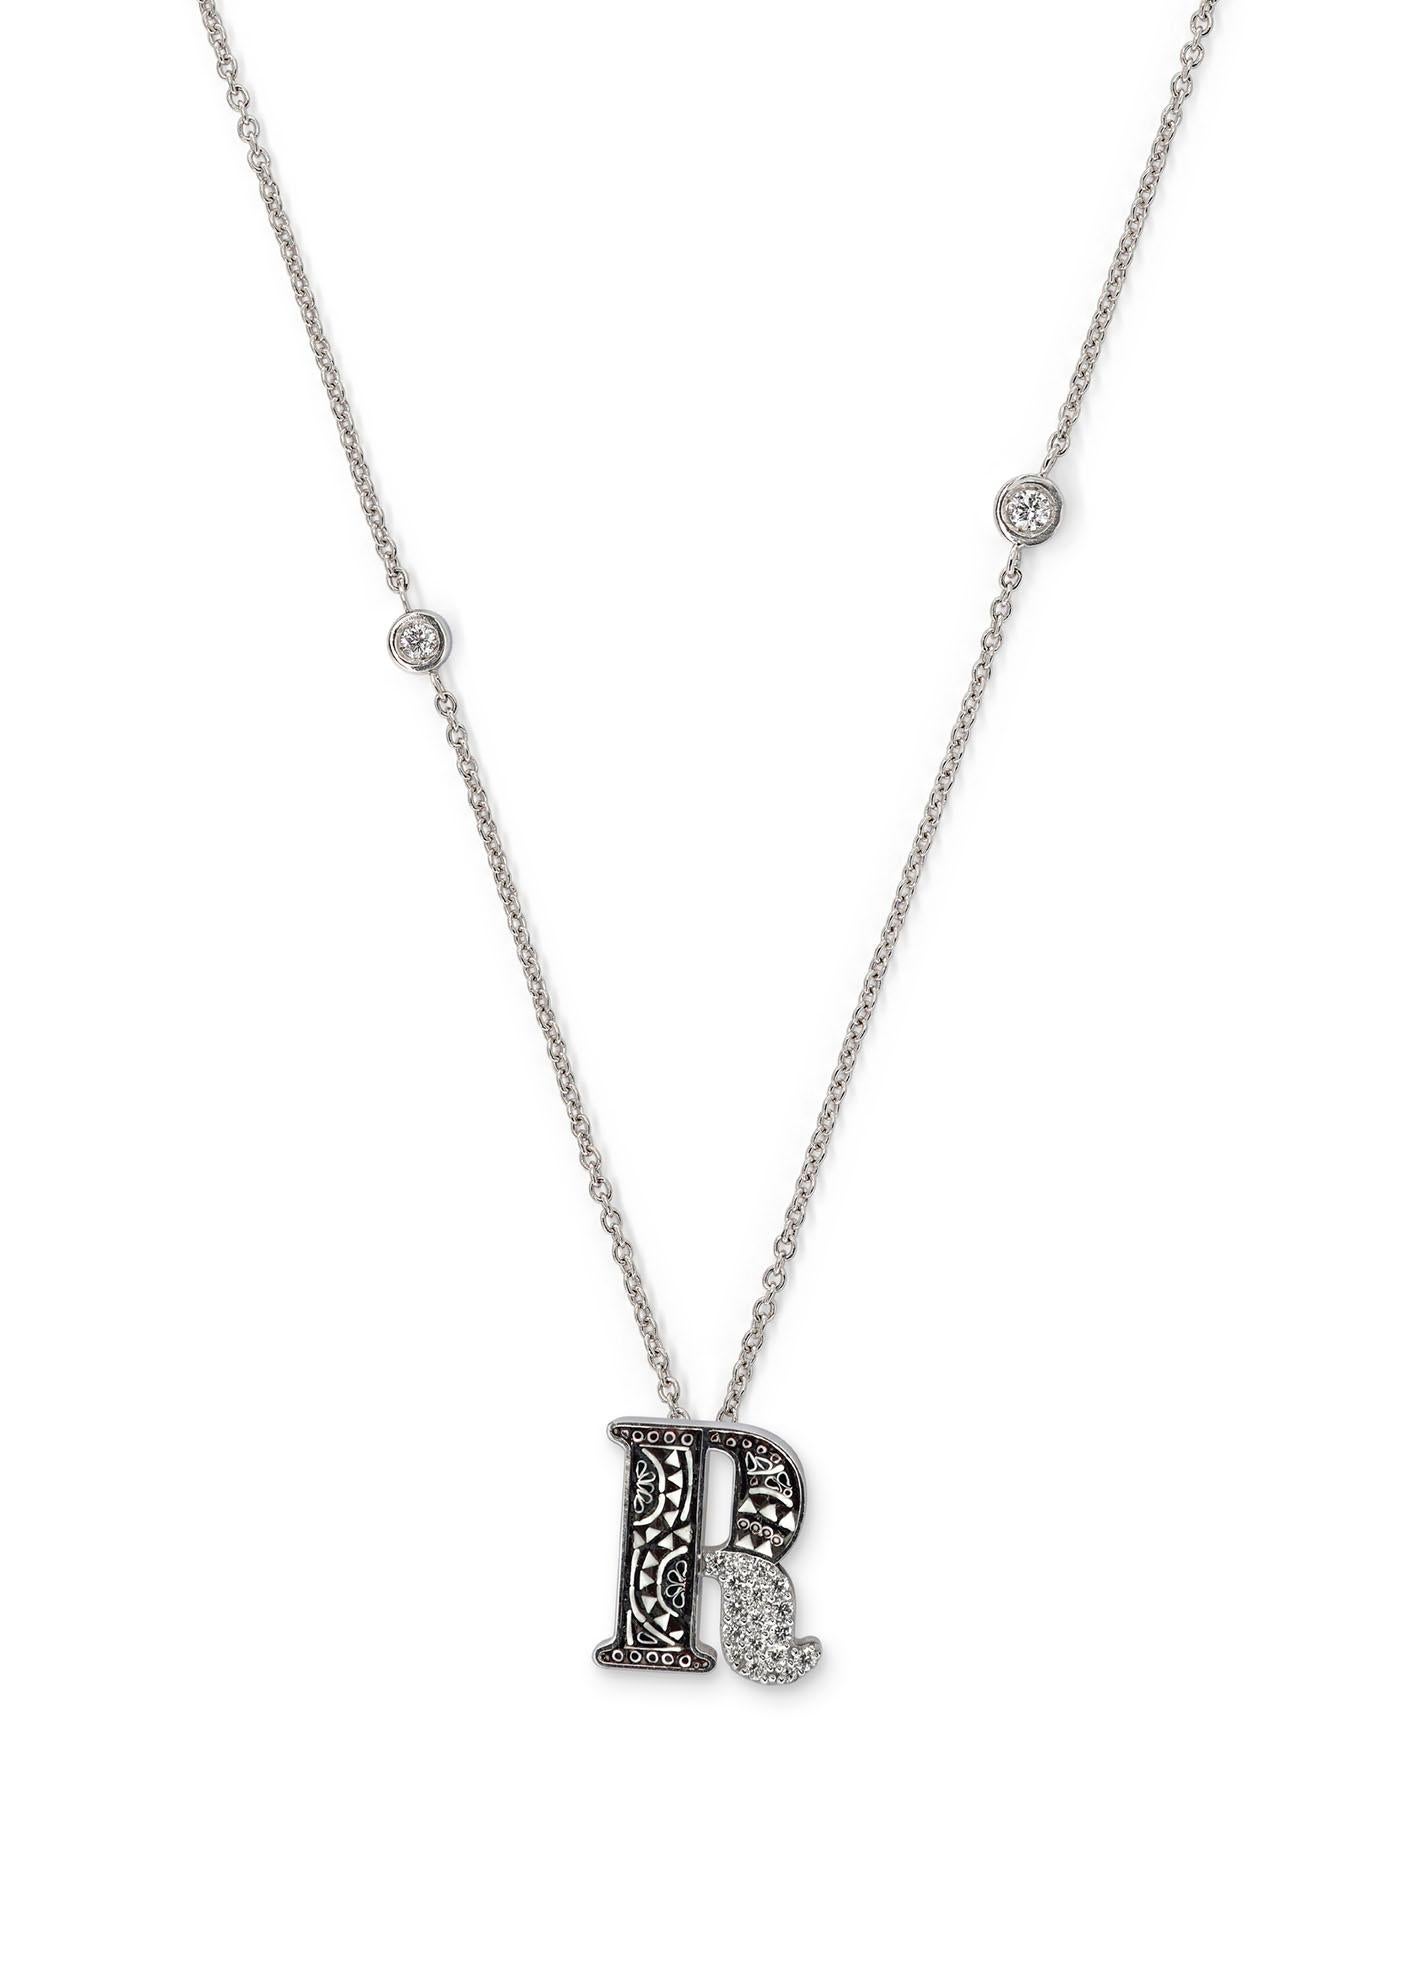 Contemporary Necklace Letter R White Gold White Diamonds Hand Decorated with Micromosaic For Sale